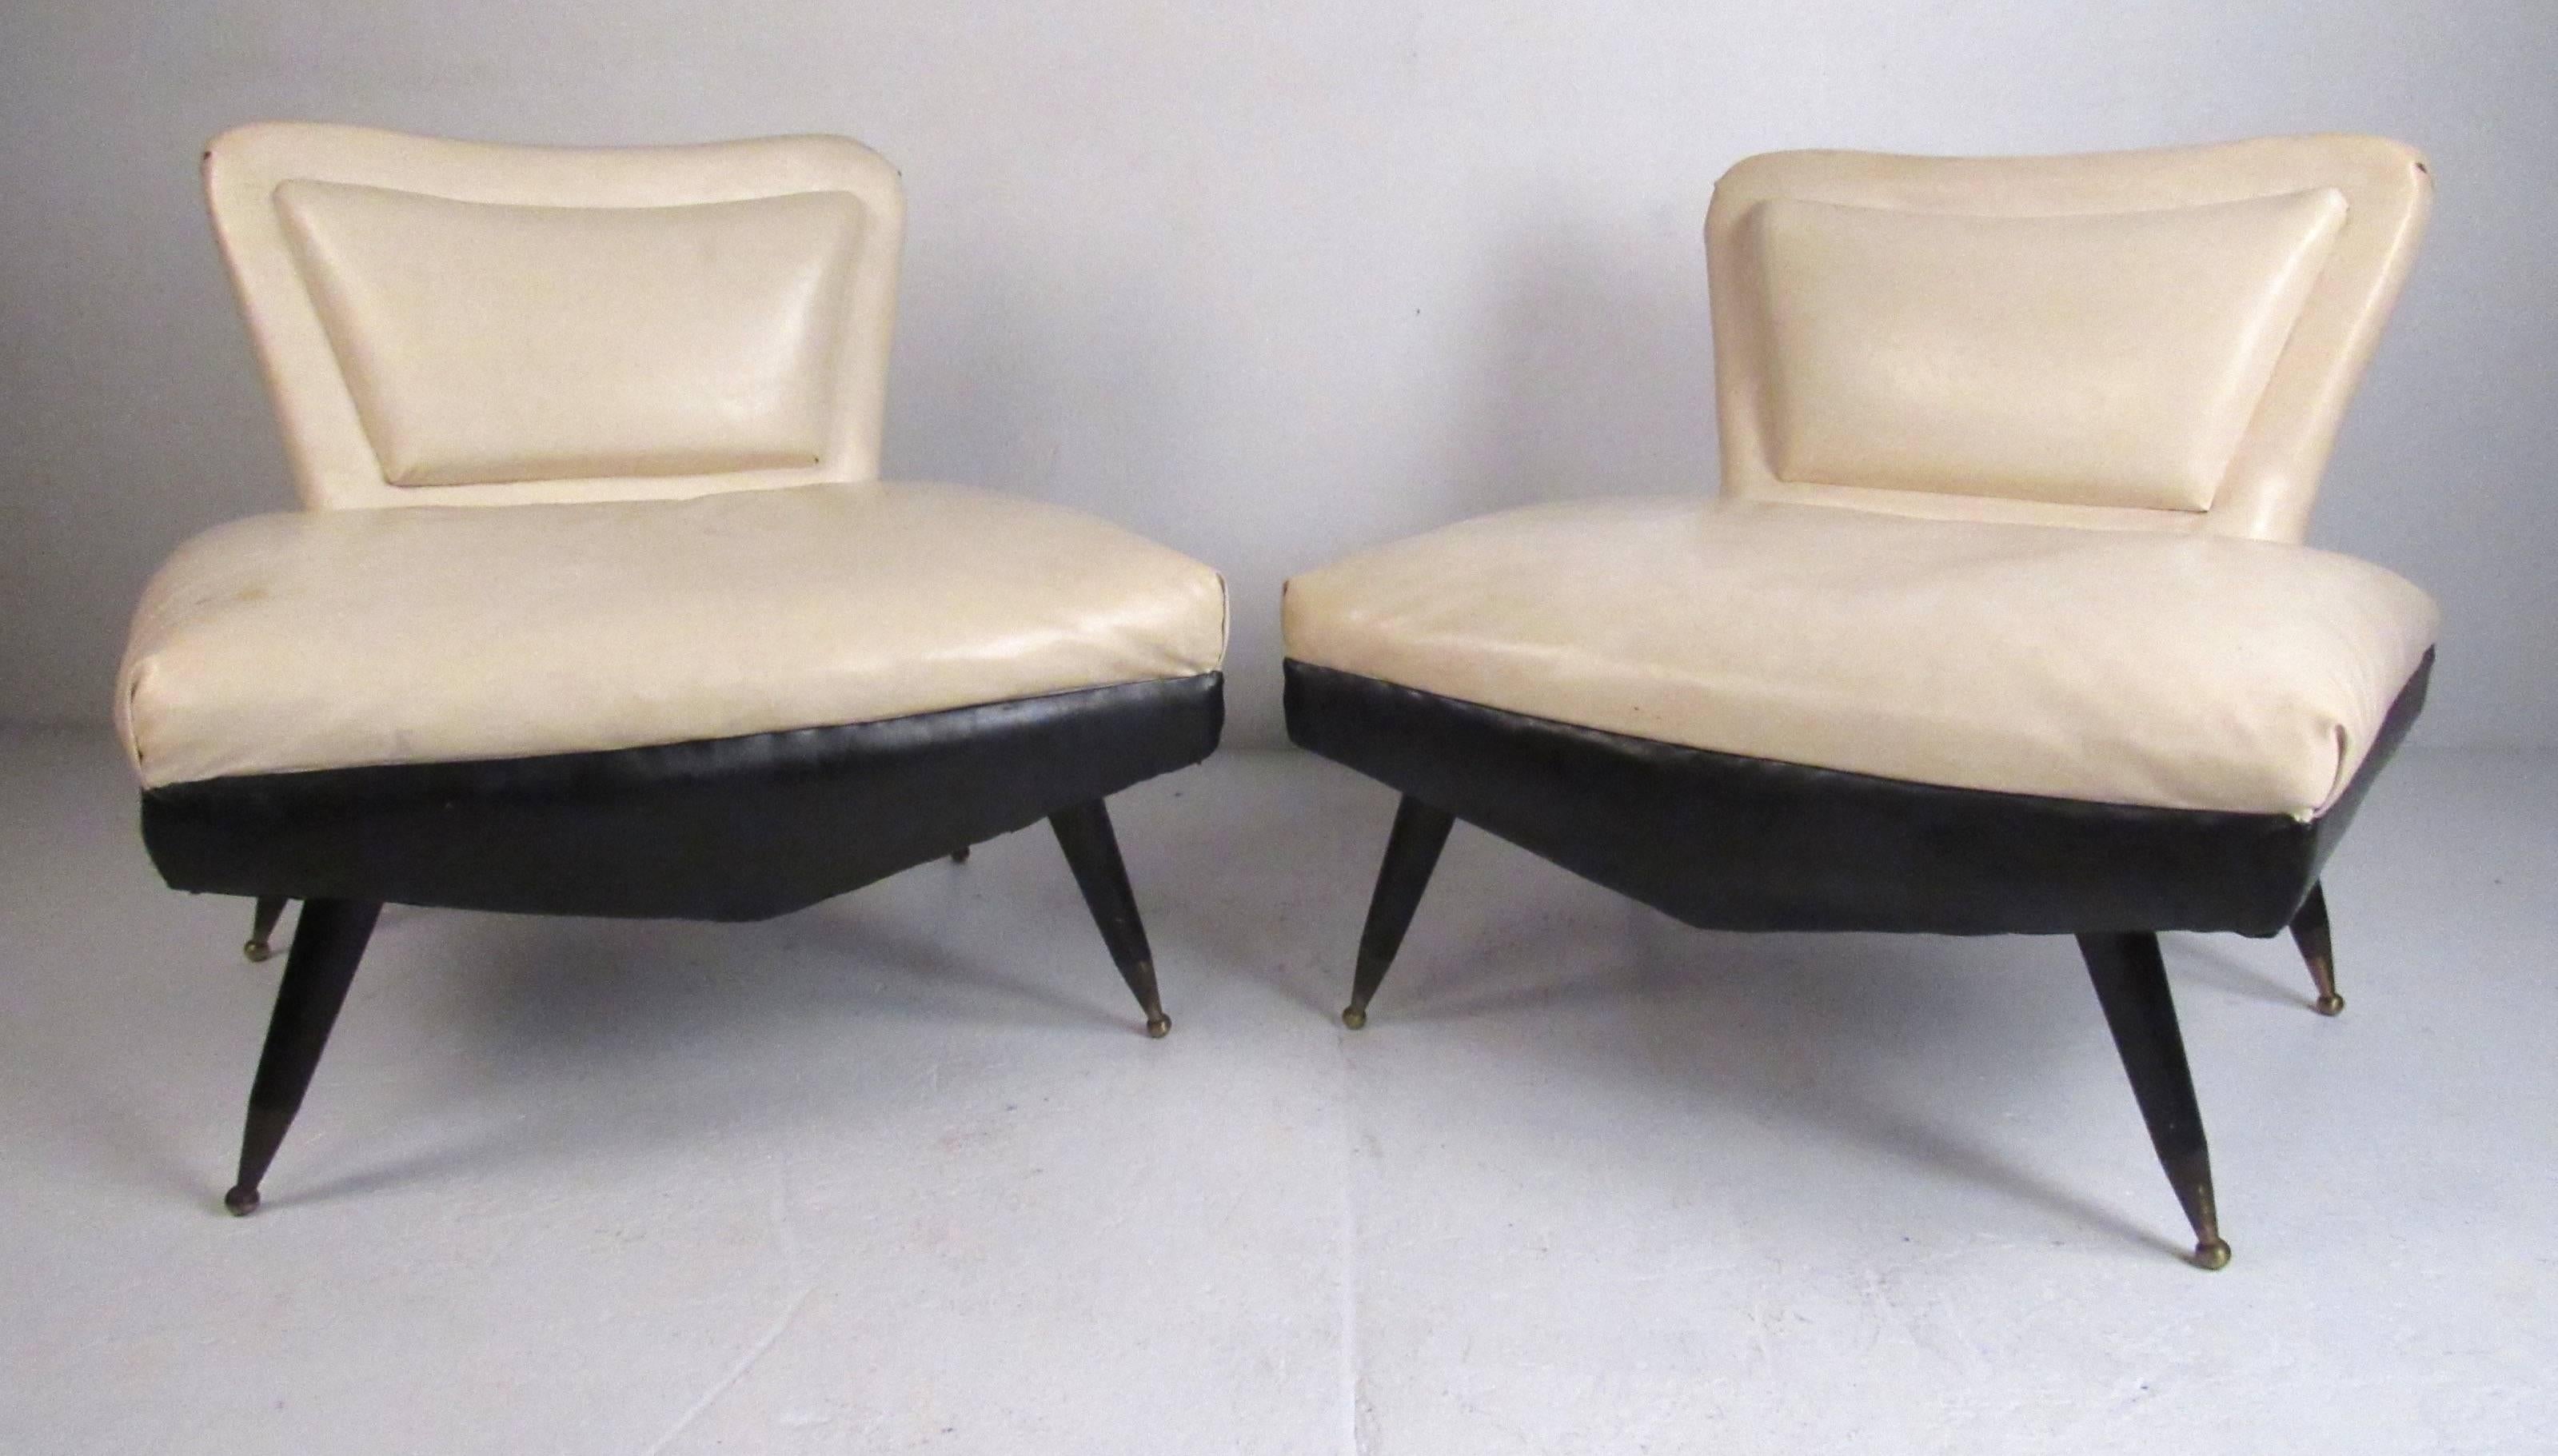 Stylish pair of sculptural Art Deco slipper chairs with tapered legs and brass sabots. Please confirm item location (NY or NJ) with dealer.